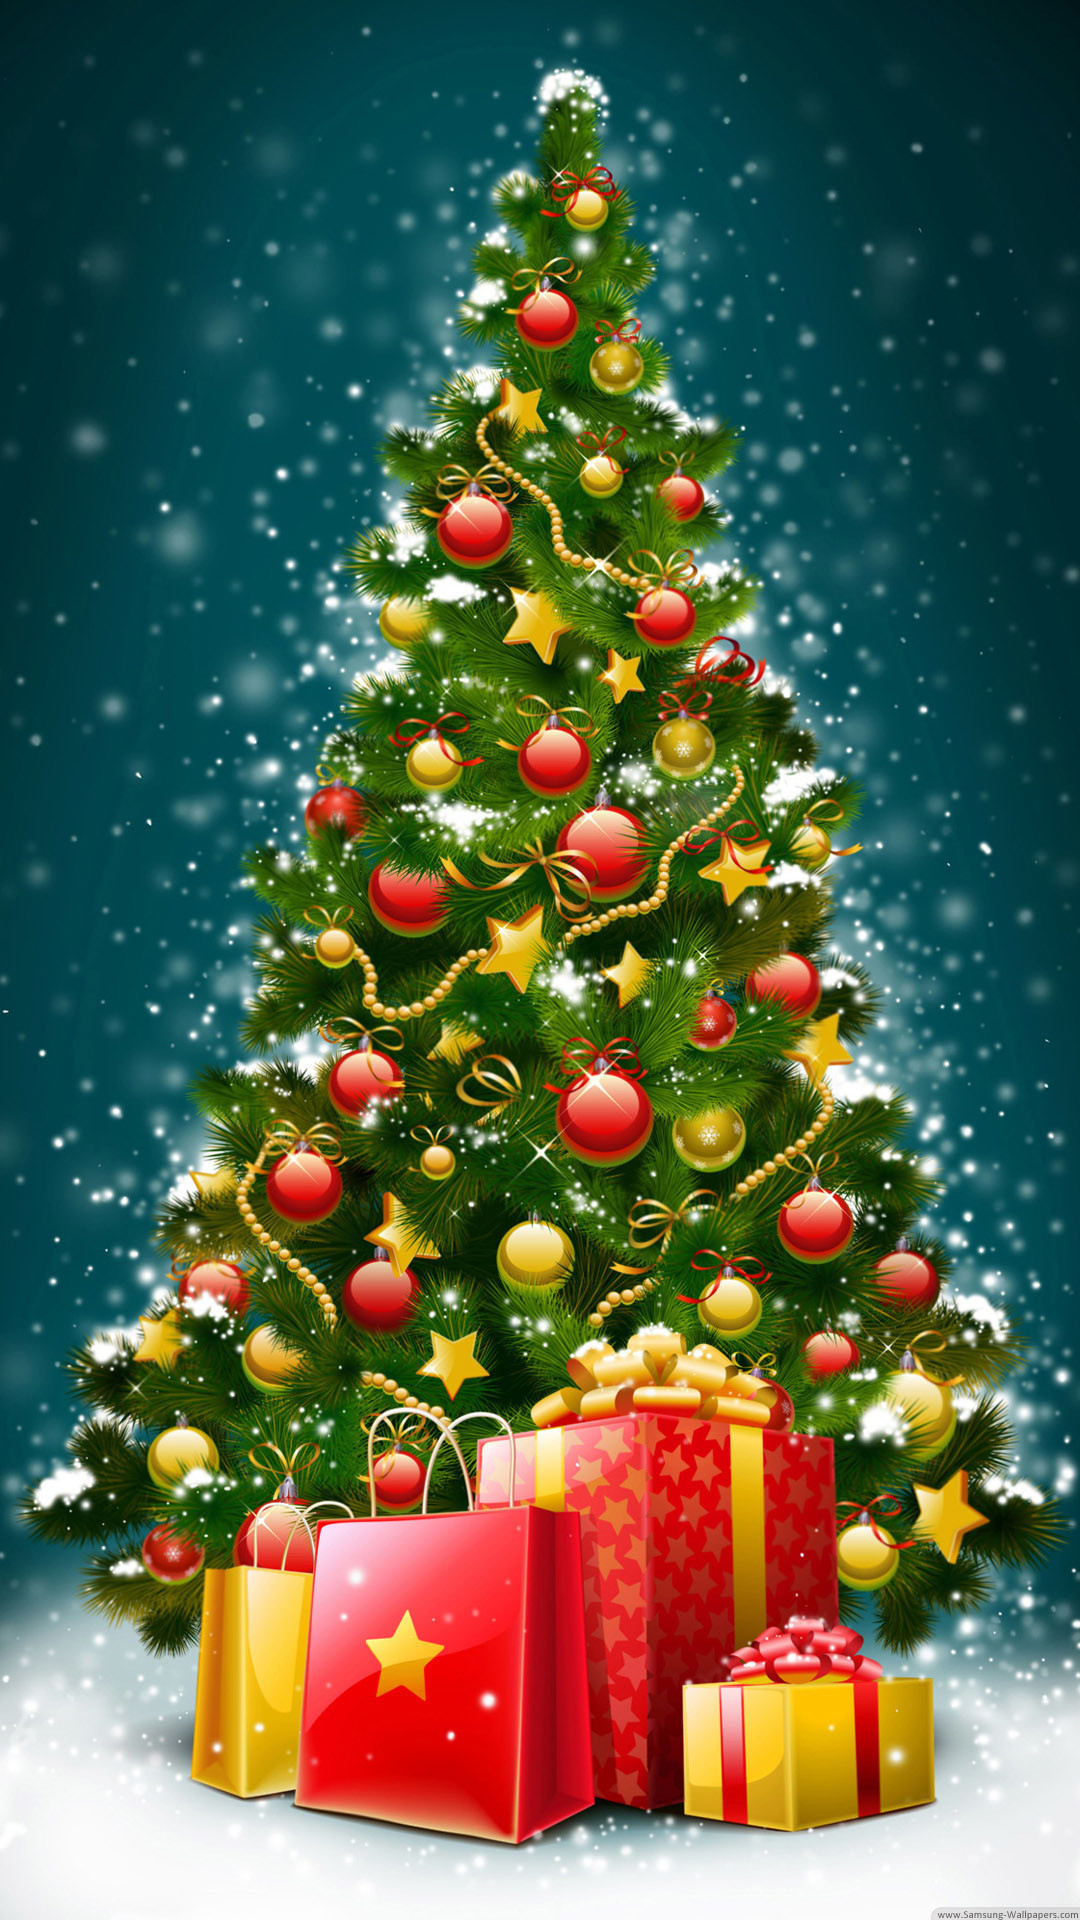 1080x1920 Best Christmas Wallpapers For Smartphones Wall Android Download Wallpaper.  best ikea kitchens. free kitchen ...